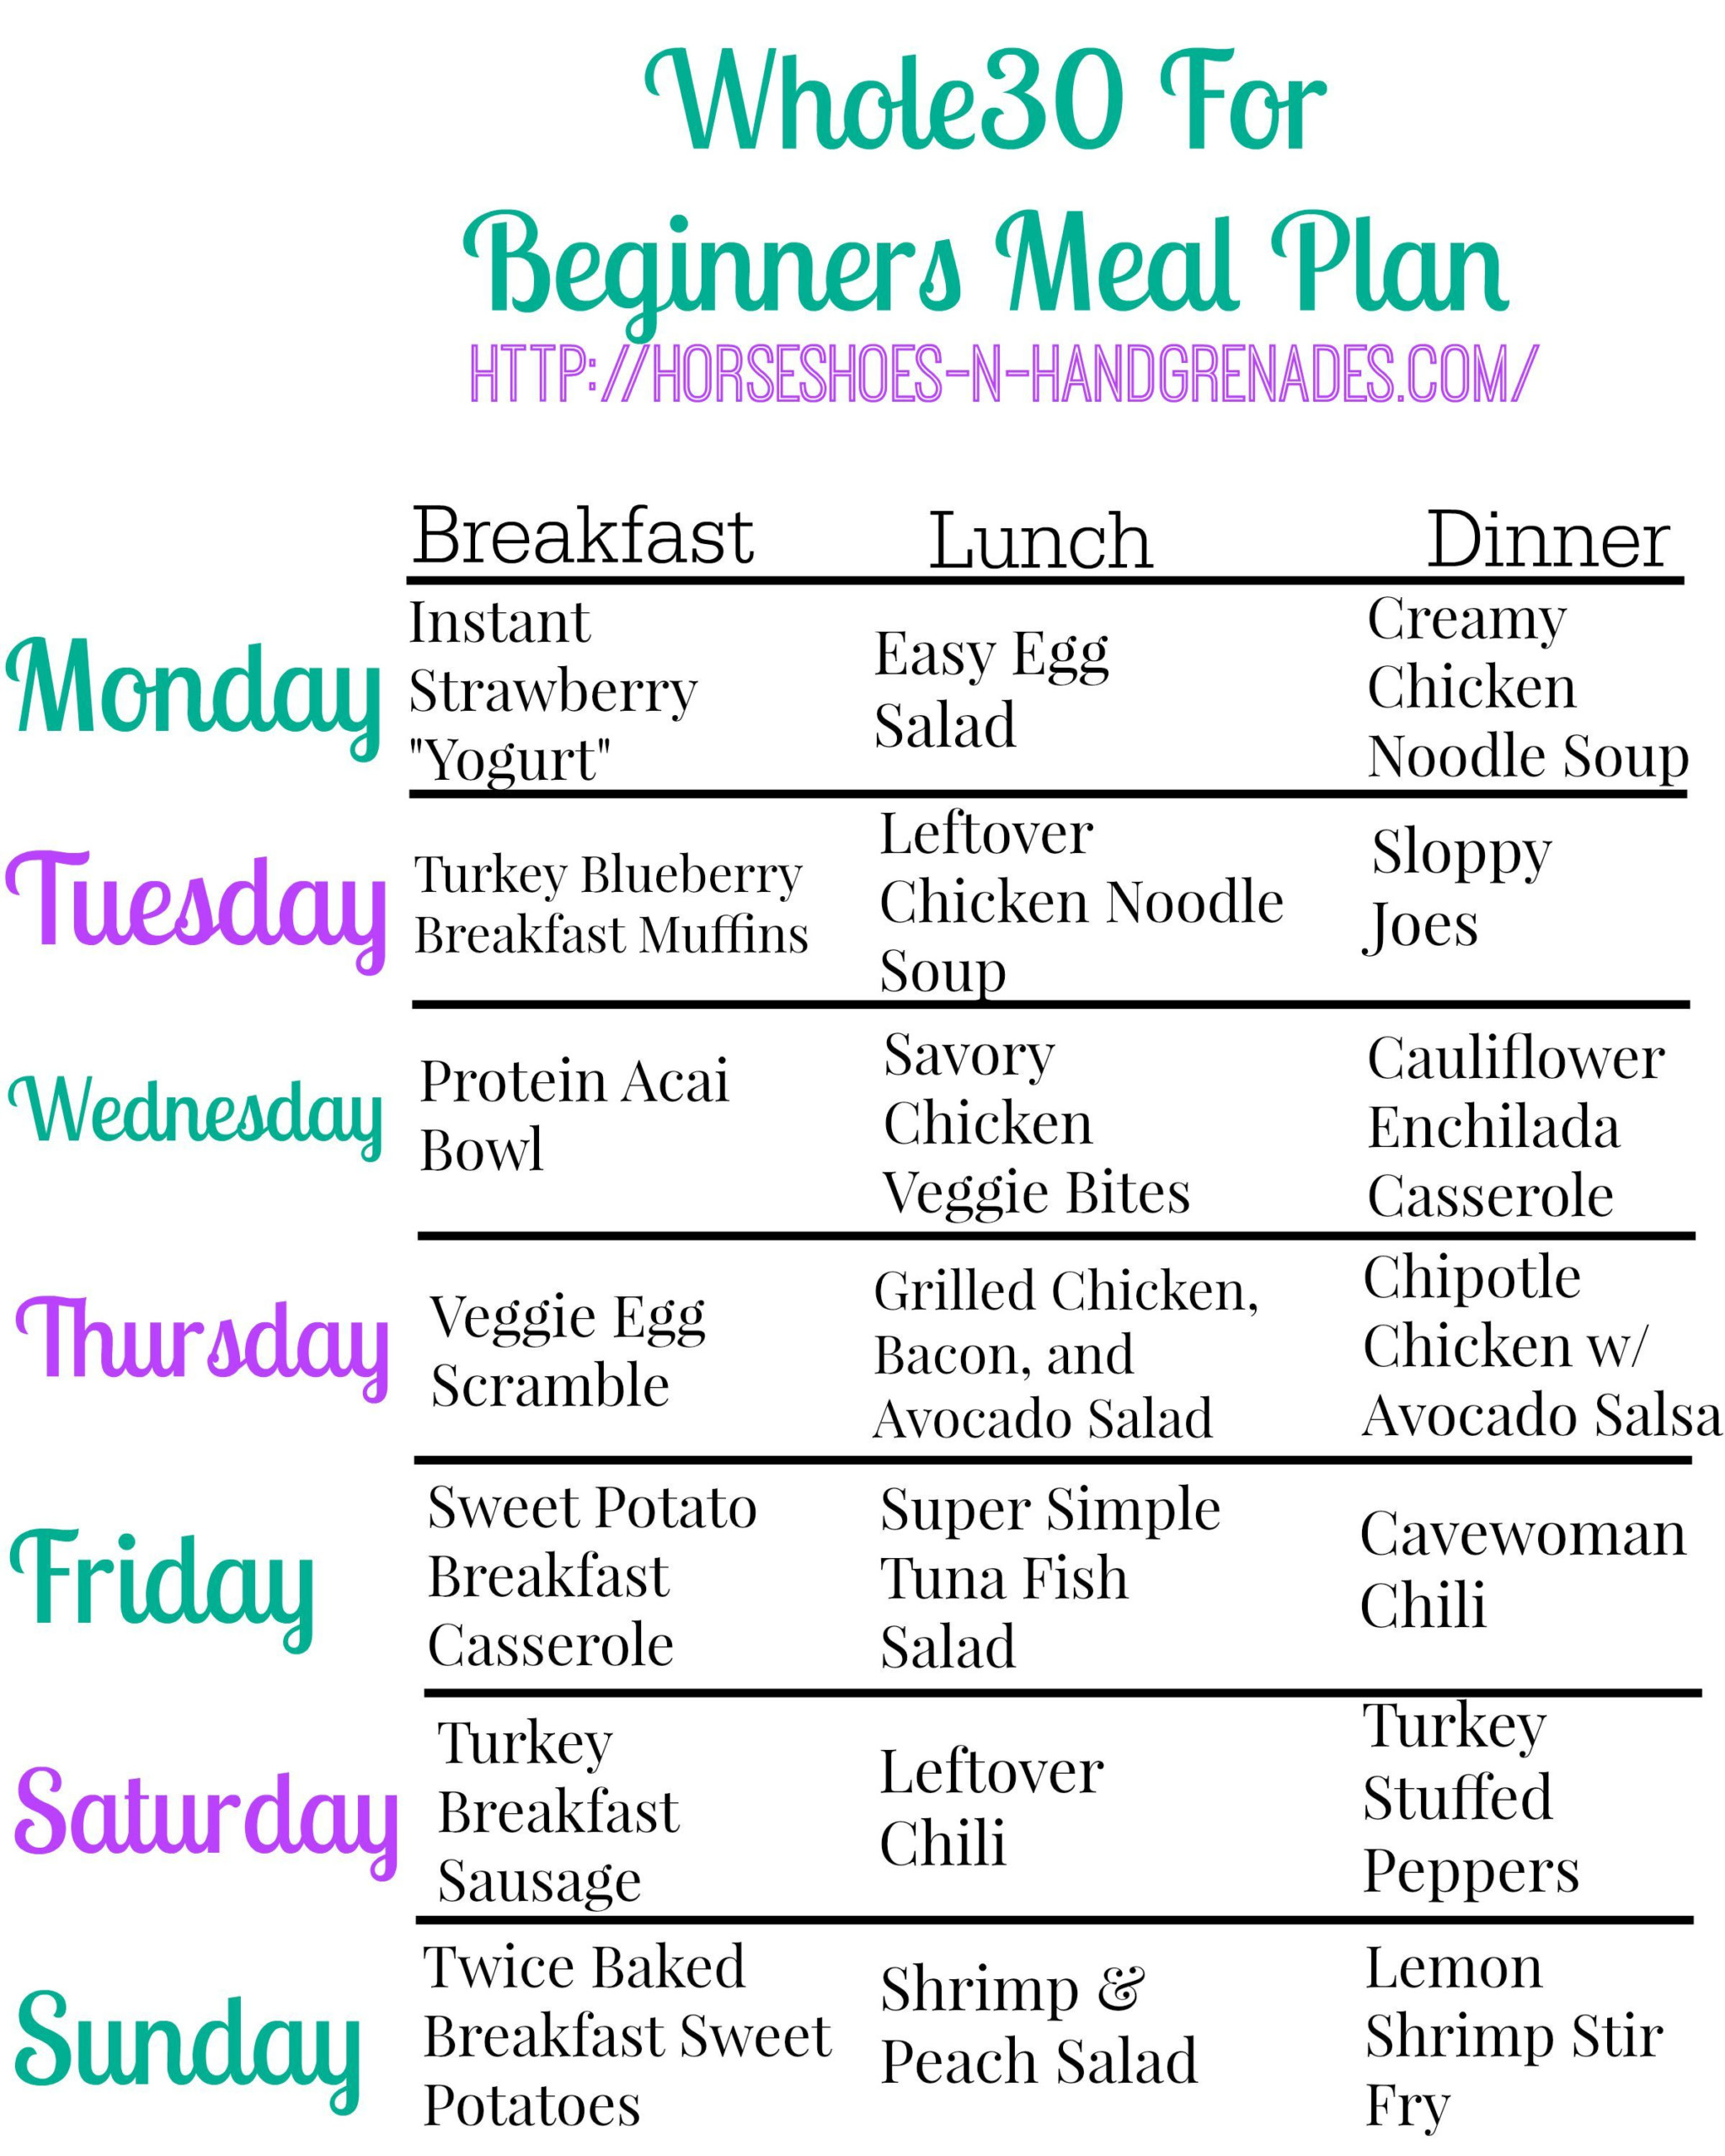 Whole30 For Beginners Weekly Meal Plan Horseshoes 